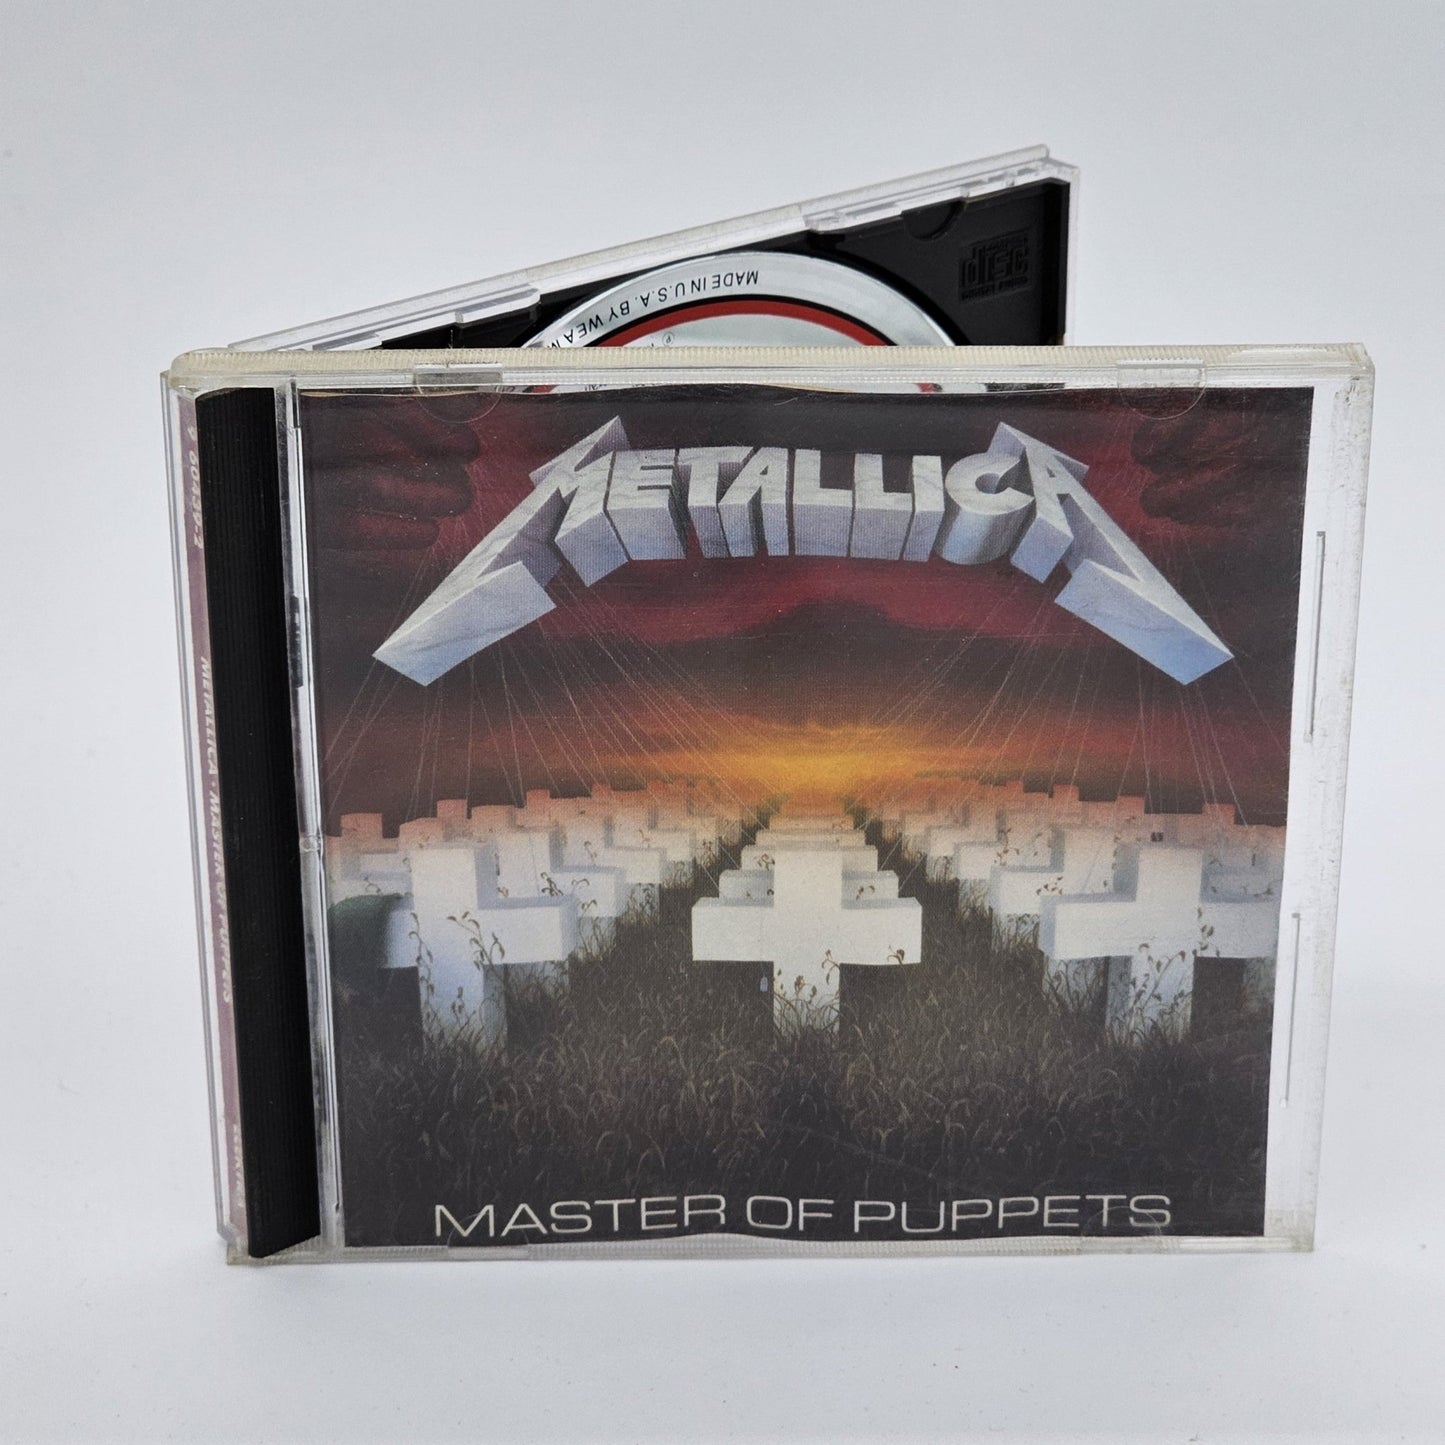 Elektra Records - Metallica | Master Of Puppets | CD - Compact Disc - Steady Bunny Shop